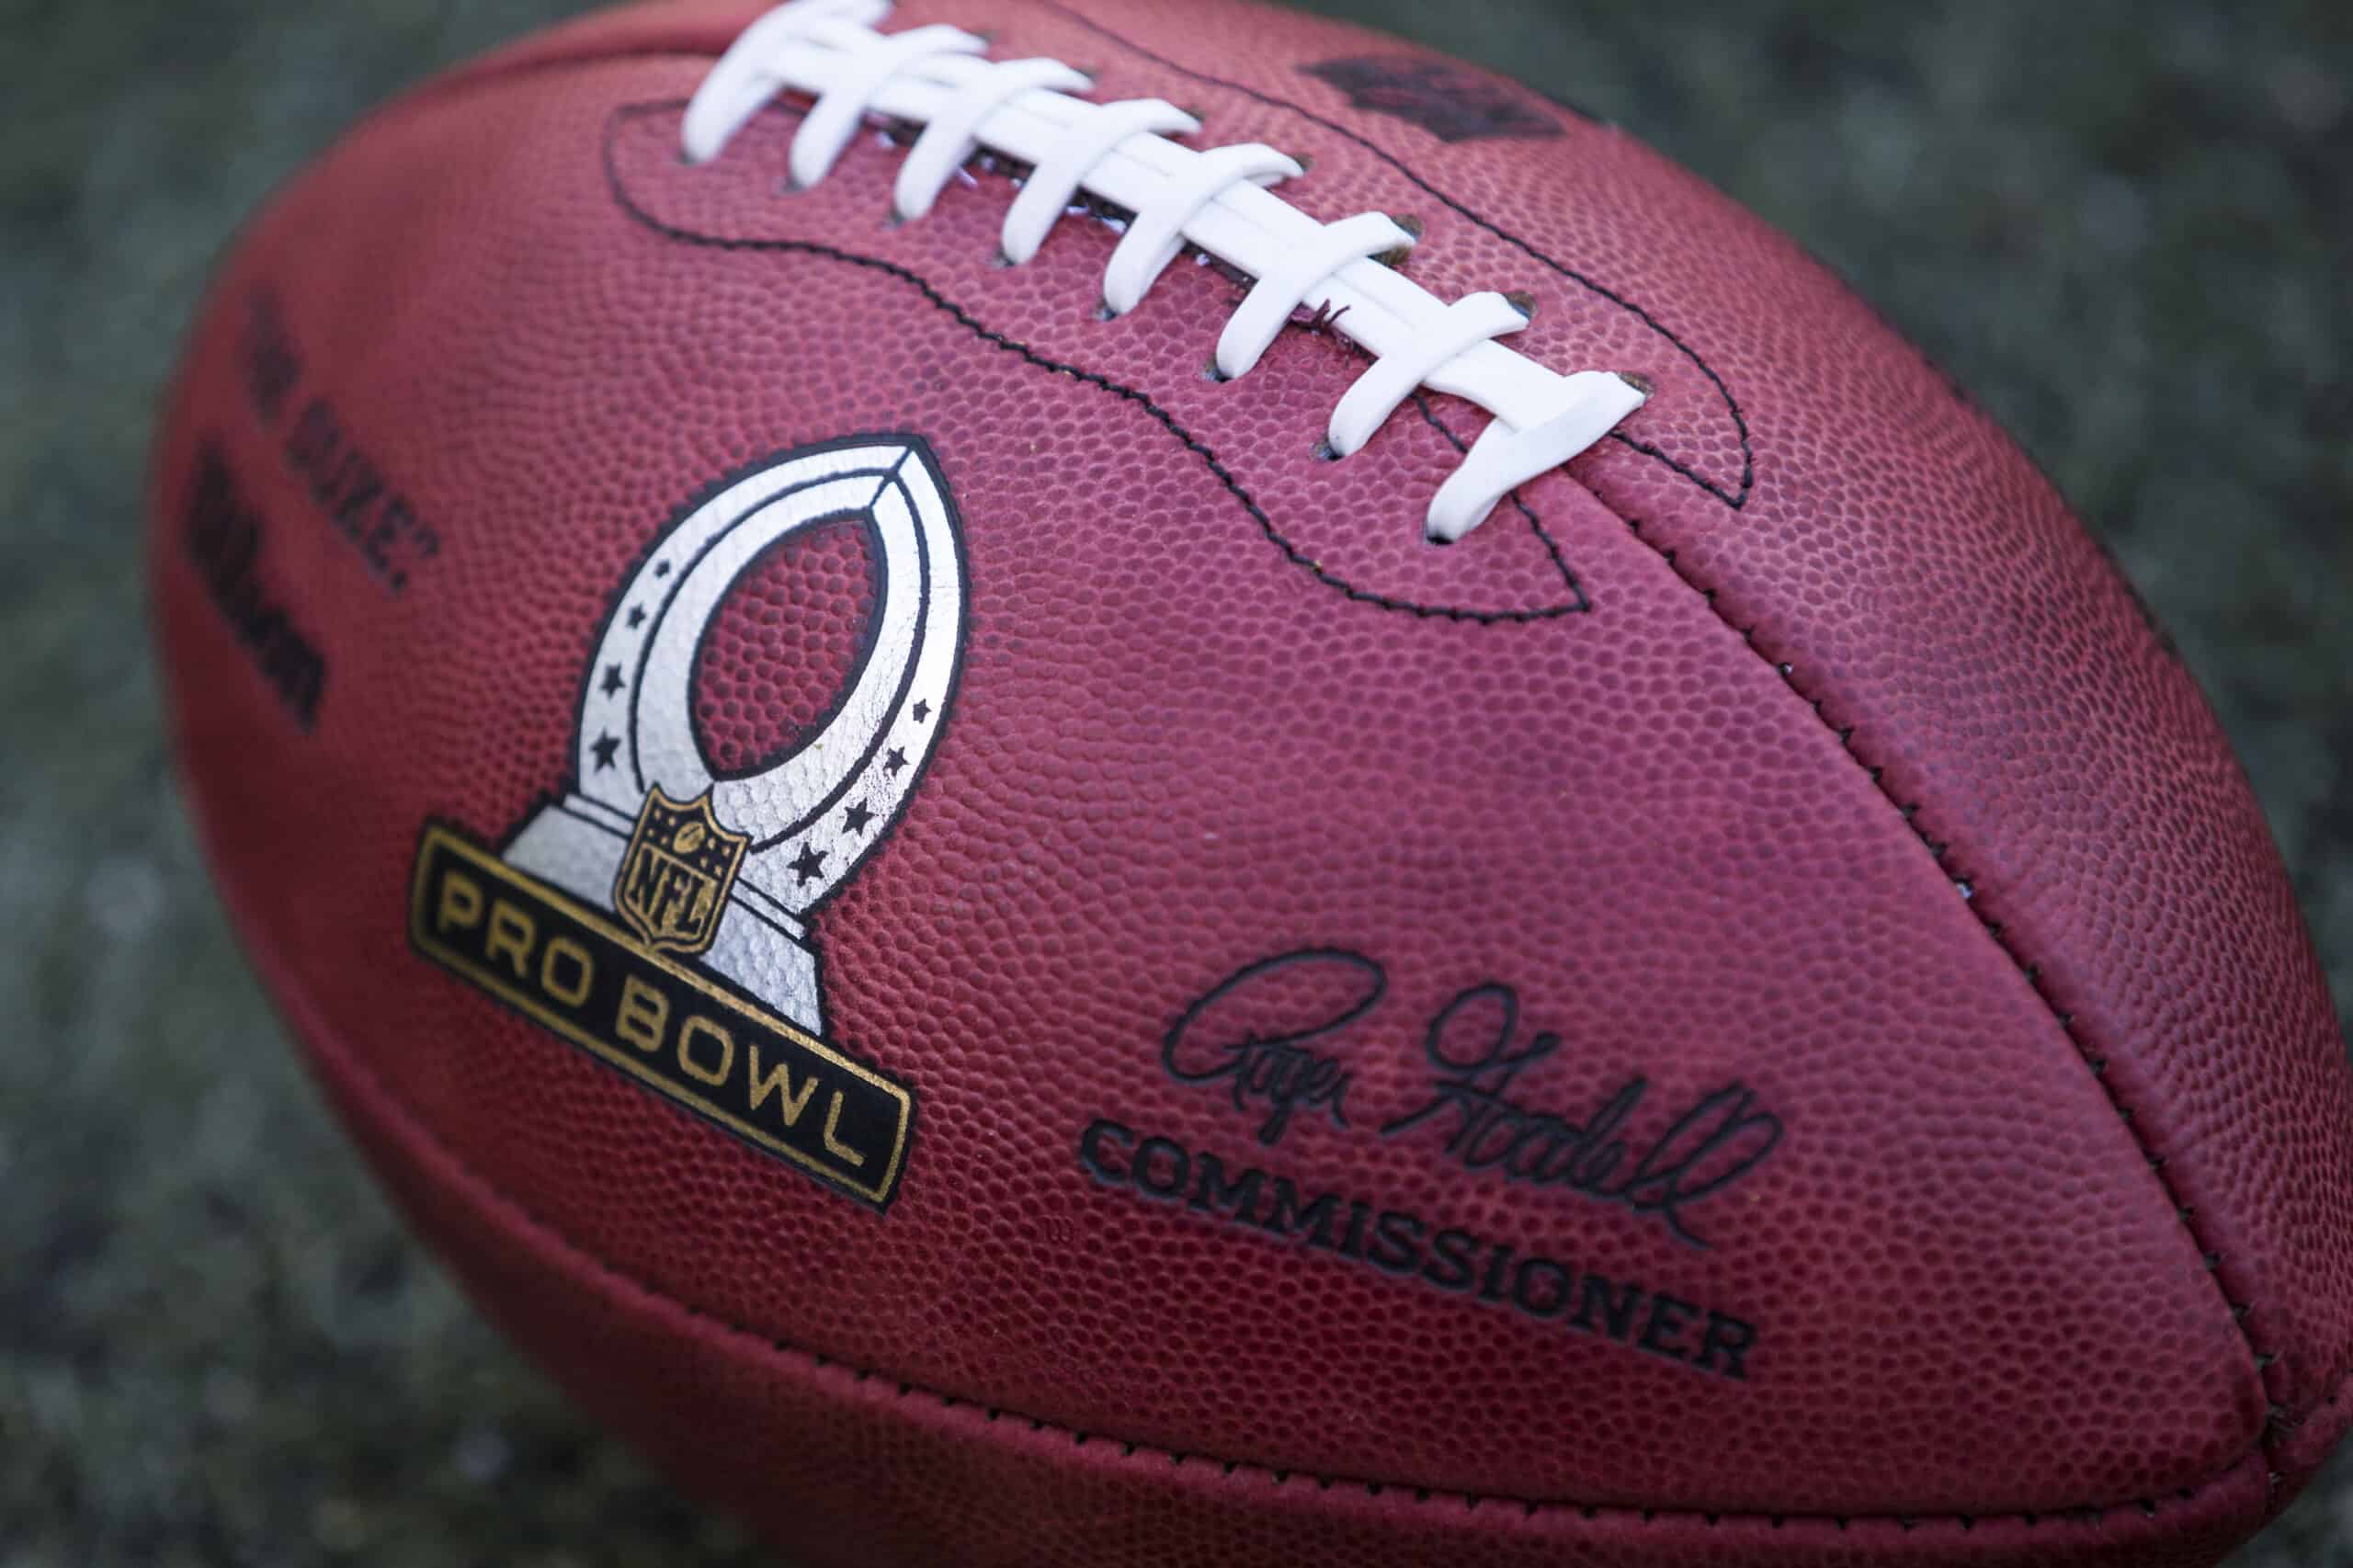 The Pro Bowl logo on a football during the second half of the 2016 NFL Pro Bowl at Aloha Stadium on January 31, 2016 in Honolulu, Hawaii.Team Irvin defeated Team Rice 49-27.